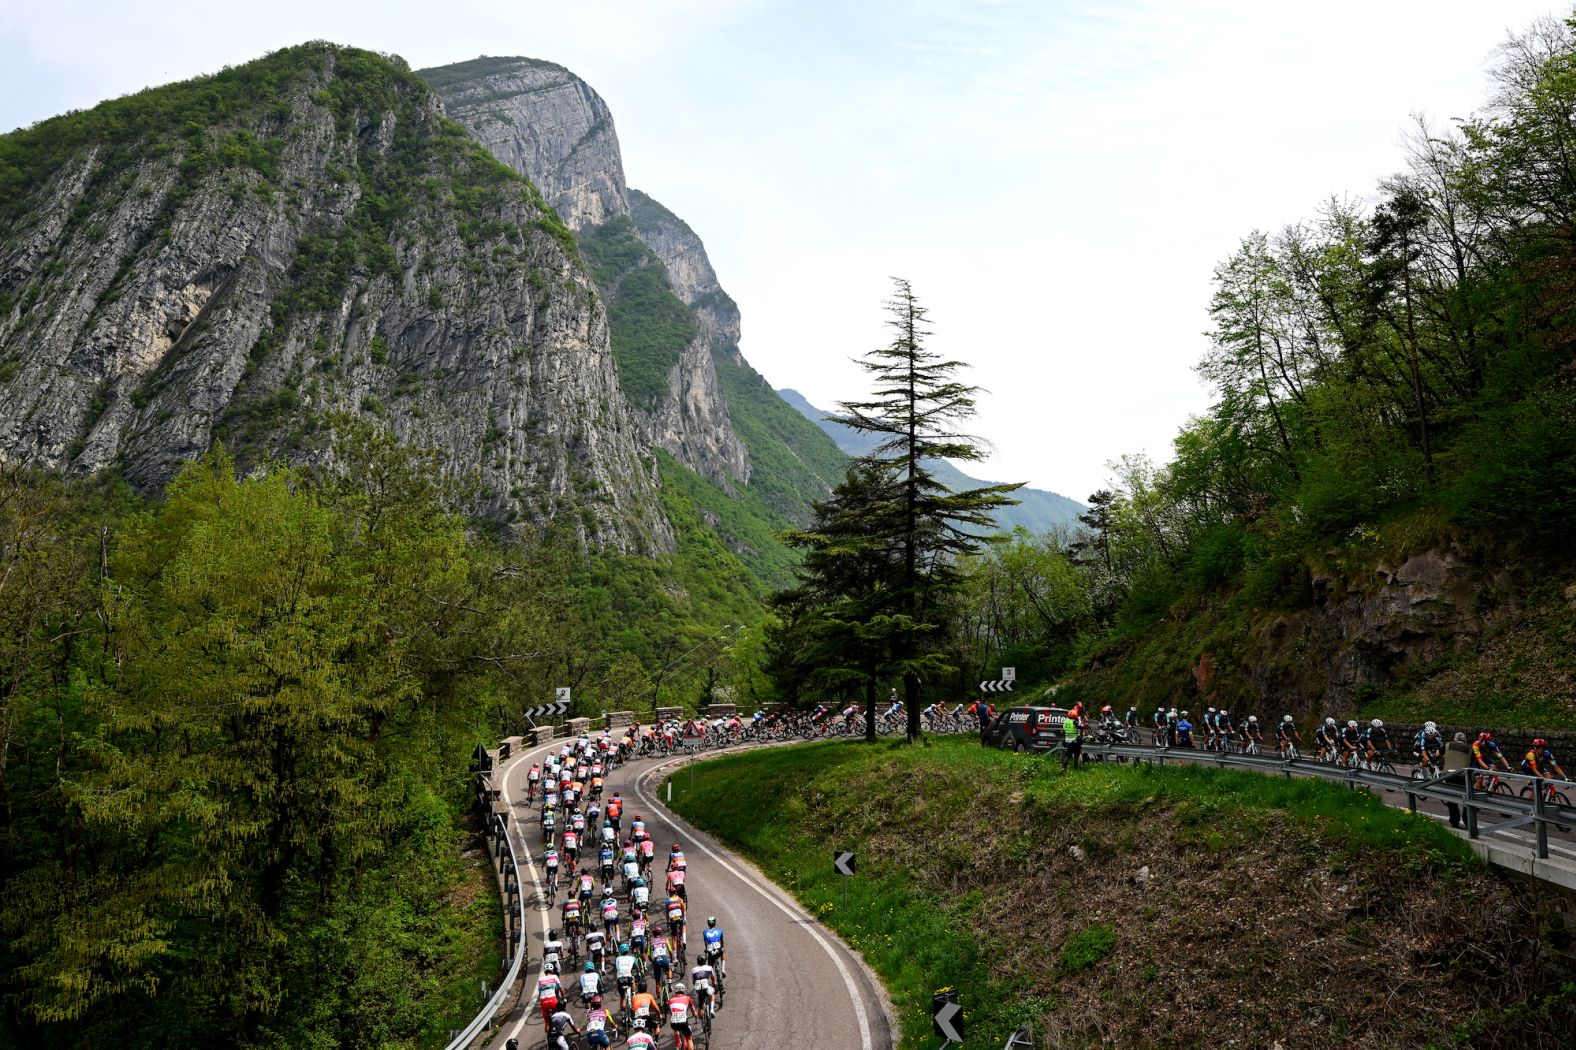 Cyclists compete in the 47th Tour of the Alps in Cortina d'Ampezzo, Italy, on Monday, April 15.